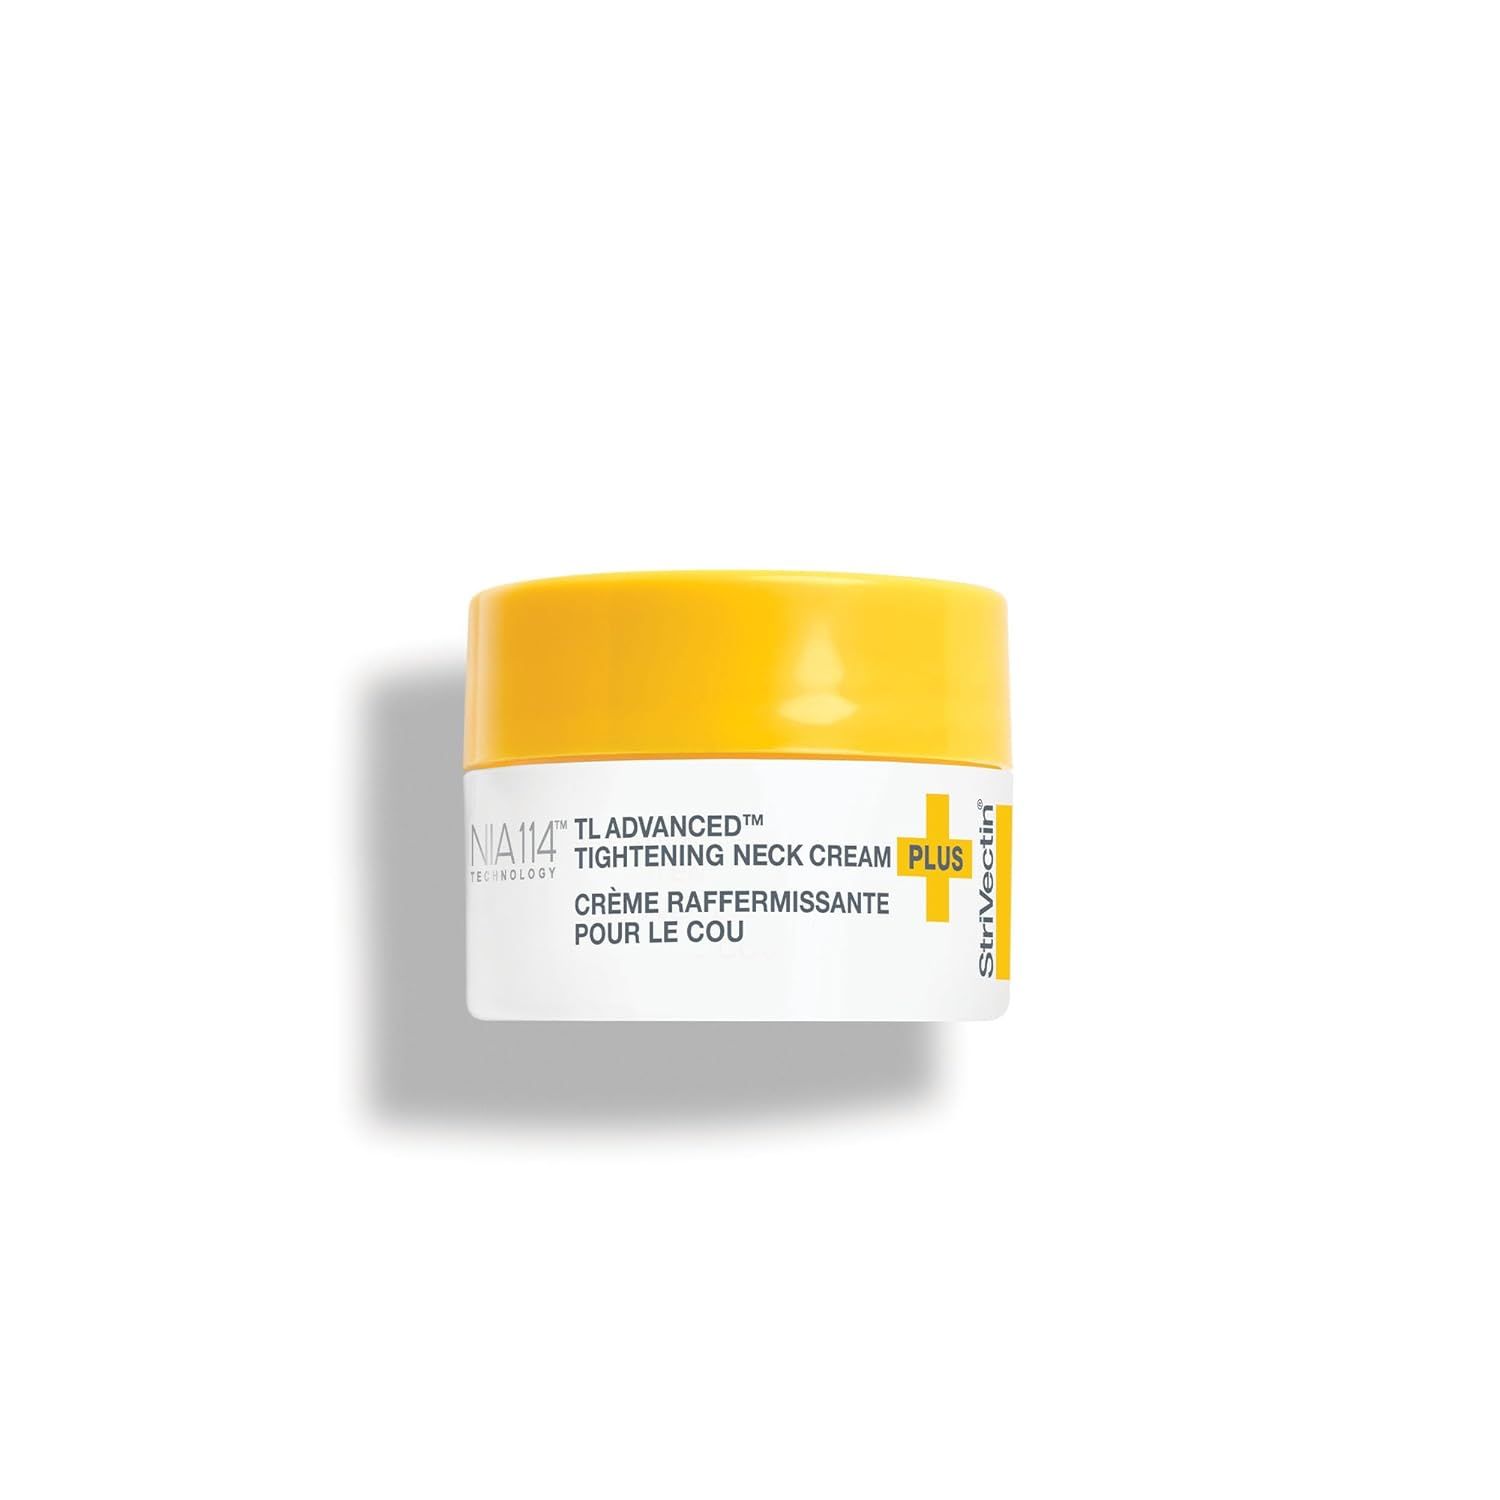 StriVectin Tighten & Lift Advanced Neck Cream PLUS with Alpha-3 Peptides™ for Neck & Décollet... | Amazon (US)